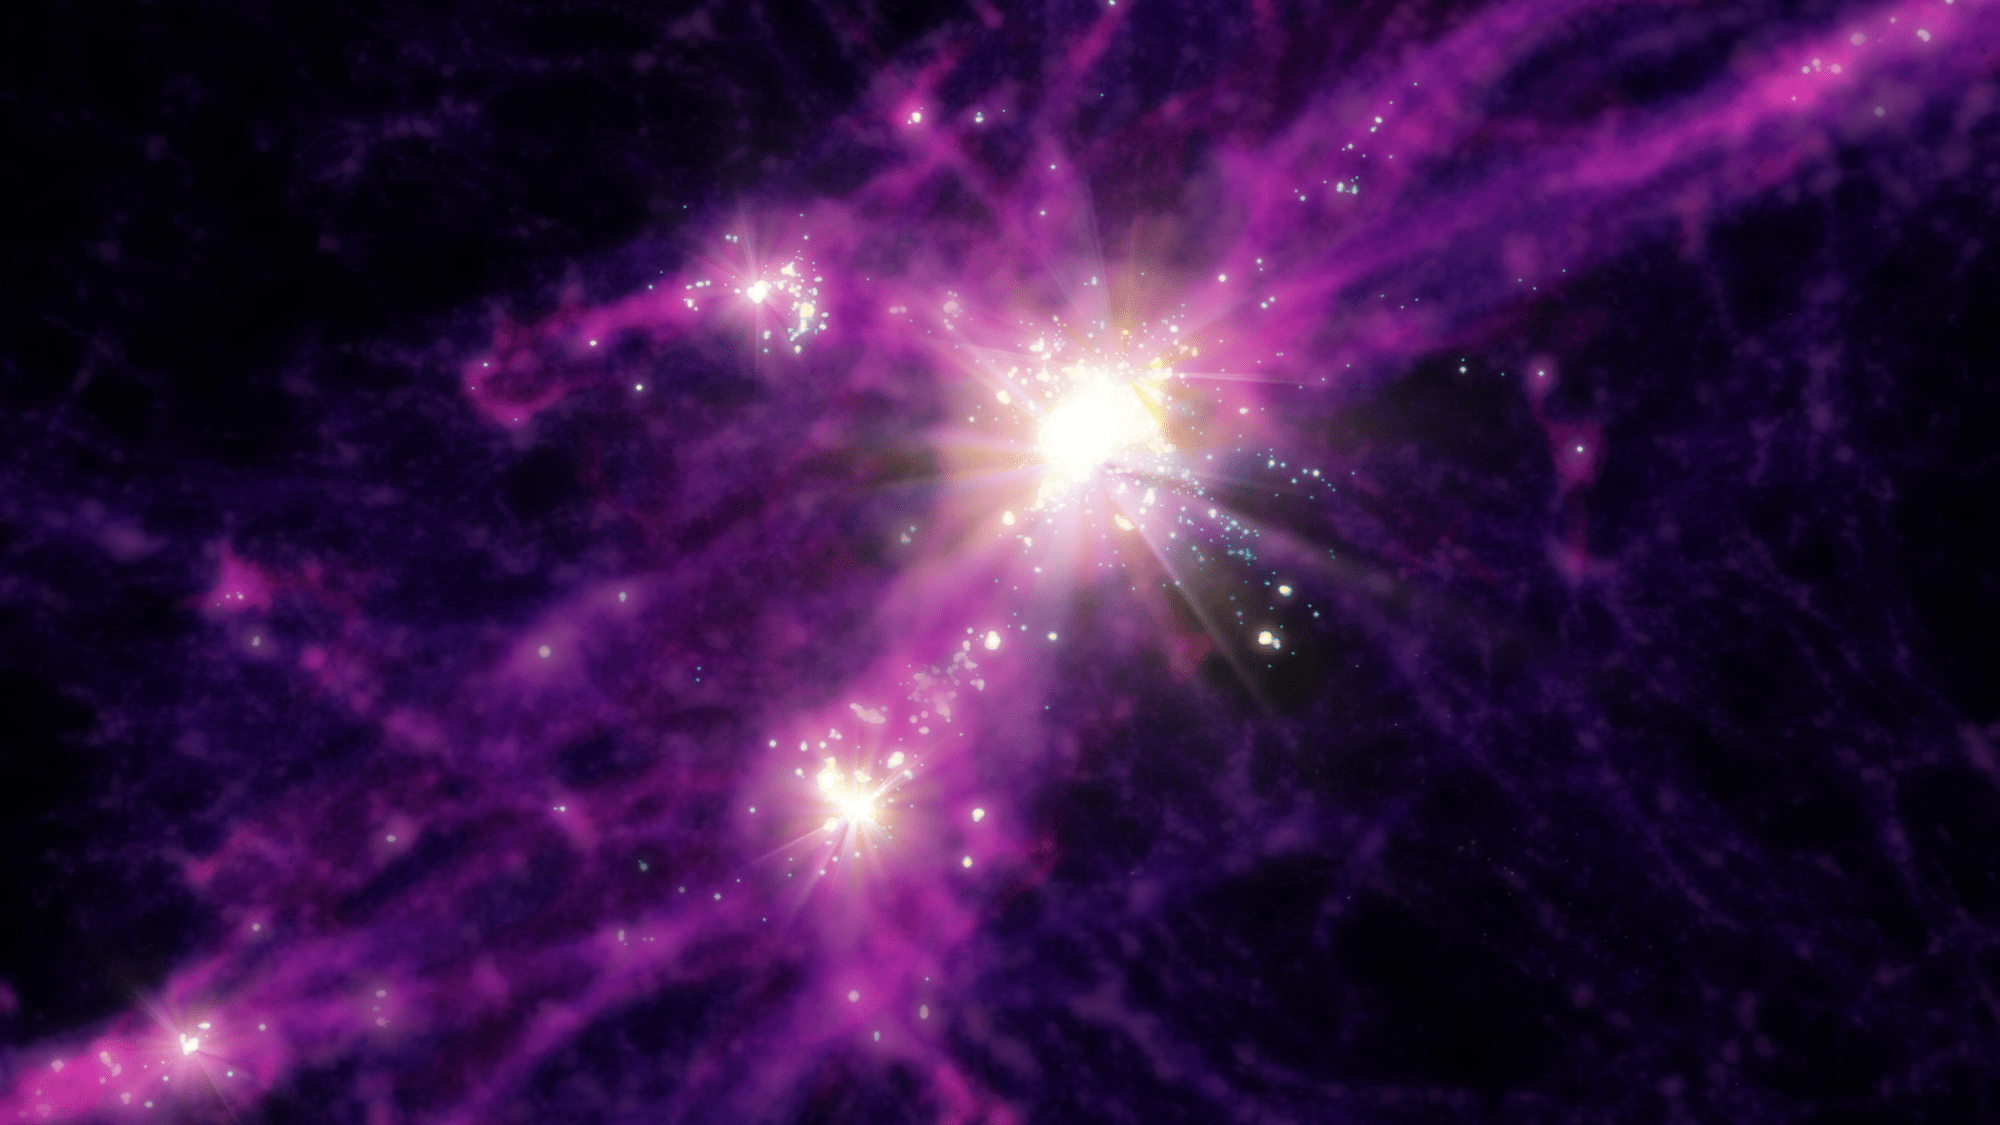 Bursting stars could explain why it was so bright after the big bang